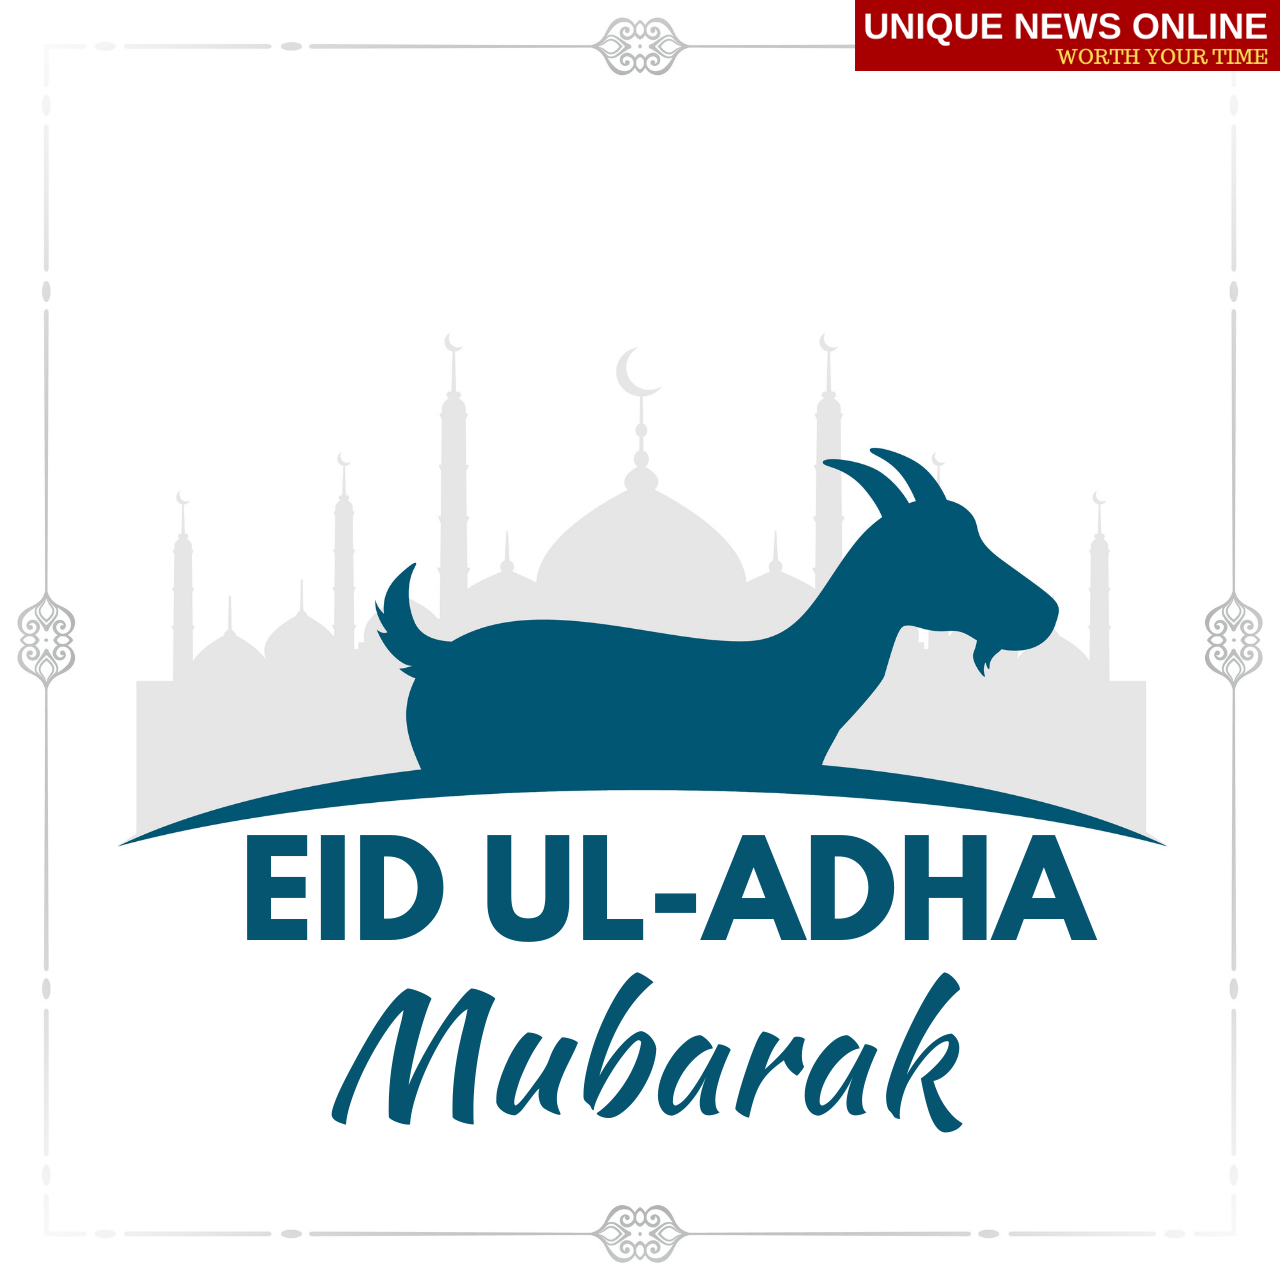 Eid ul-Adha 2021 WhatsApp Status Video to Download to greet all your Loved Ones in one-time